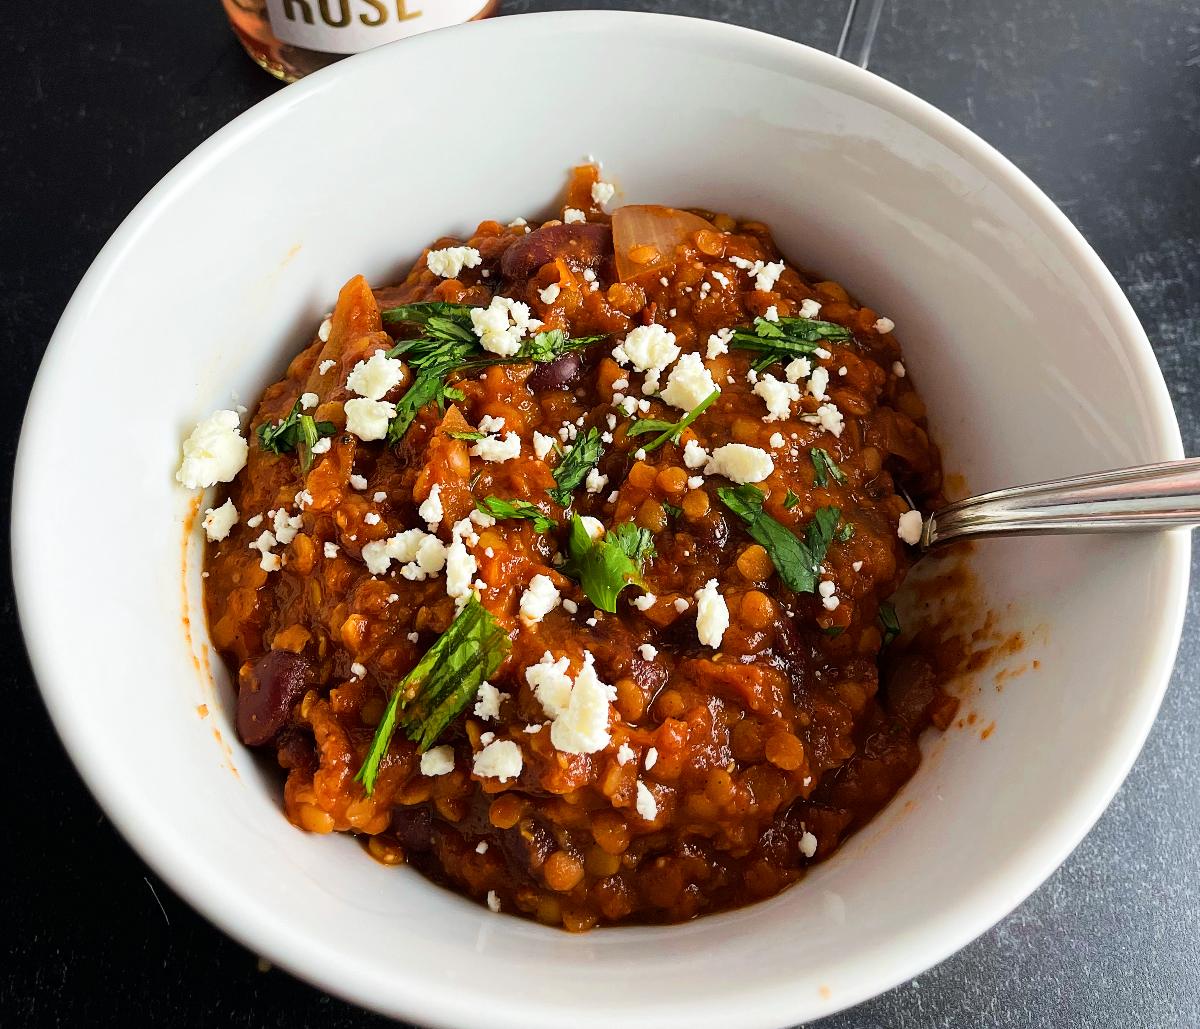 spicy lentil chili, topped with feta cheese and cilantro, served in a white bowl.